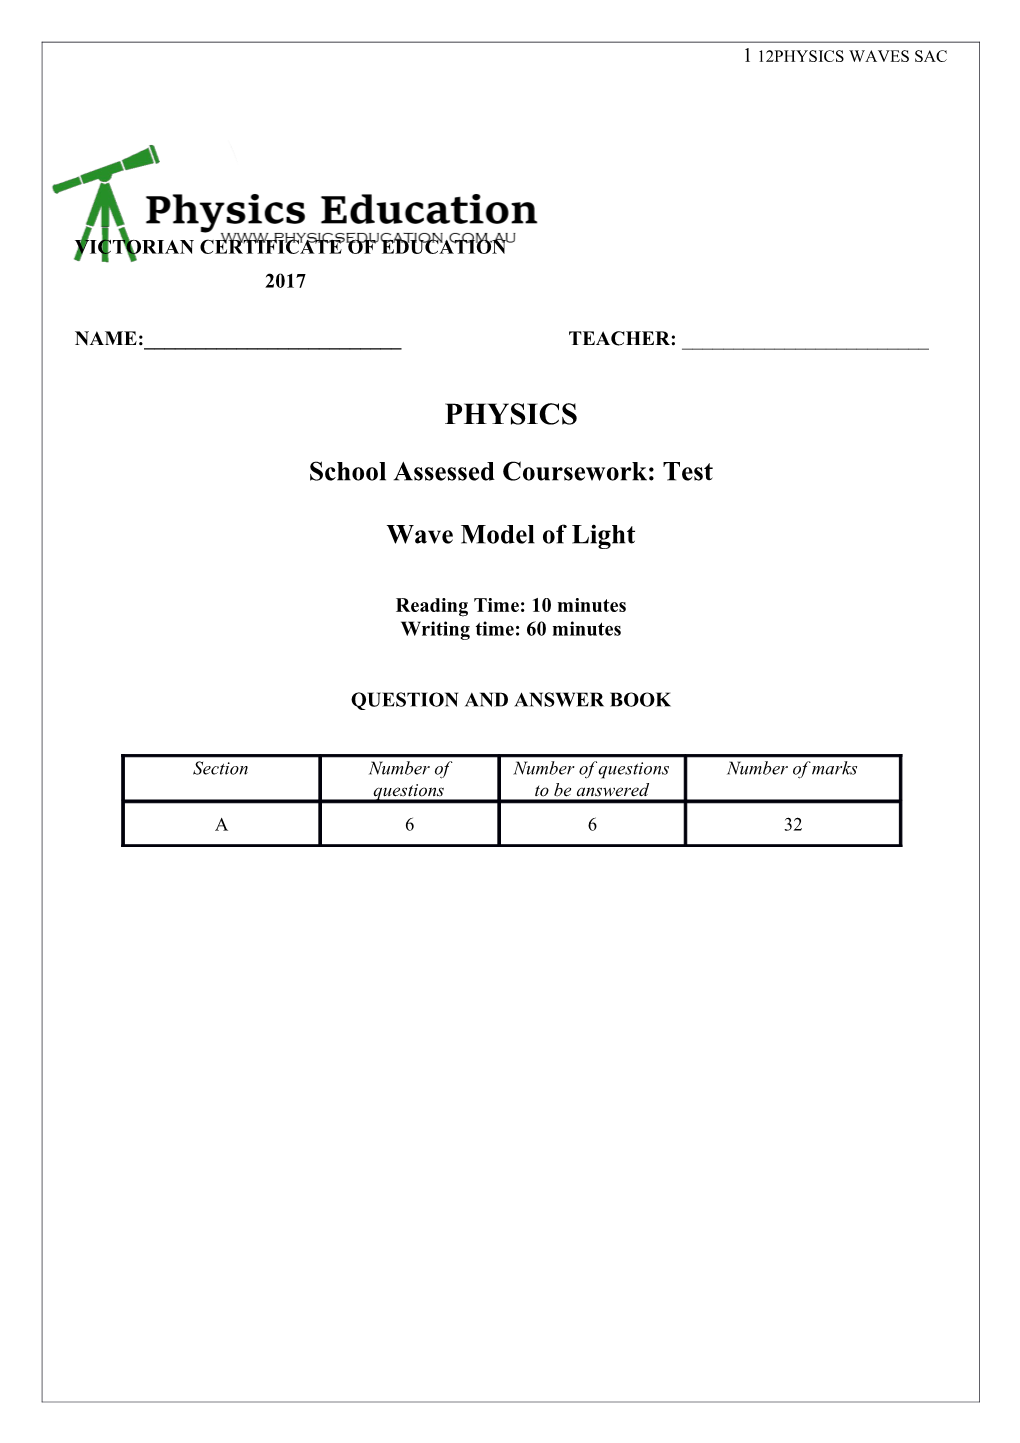 School Assessed Coursework: Test